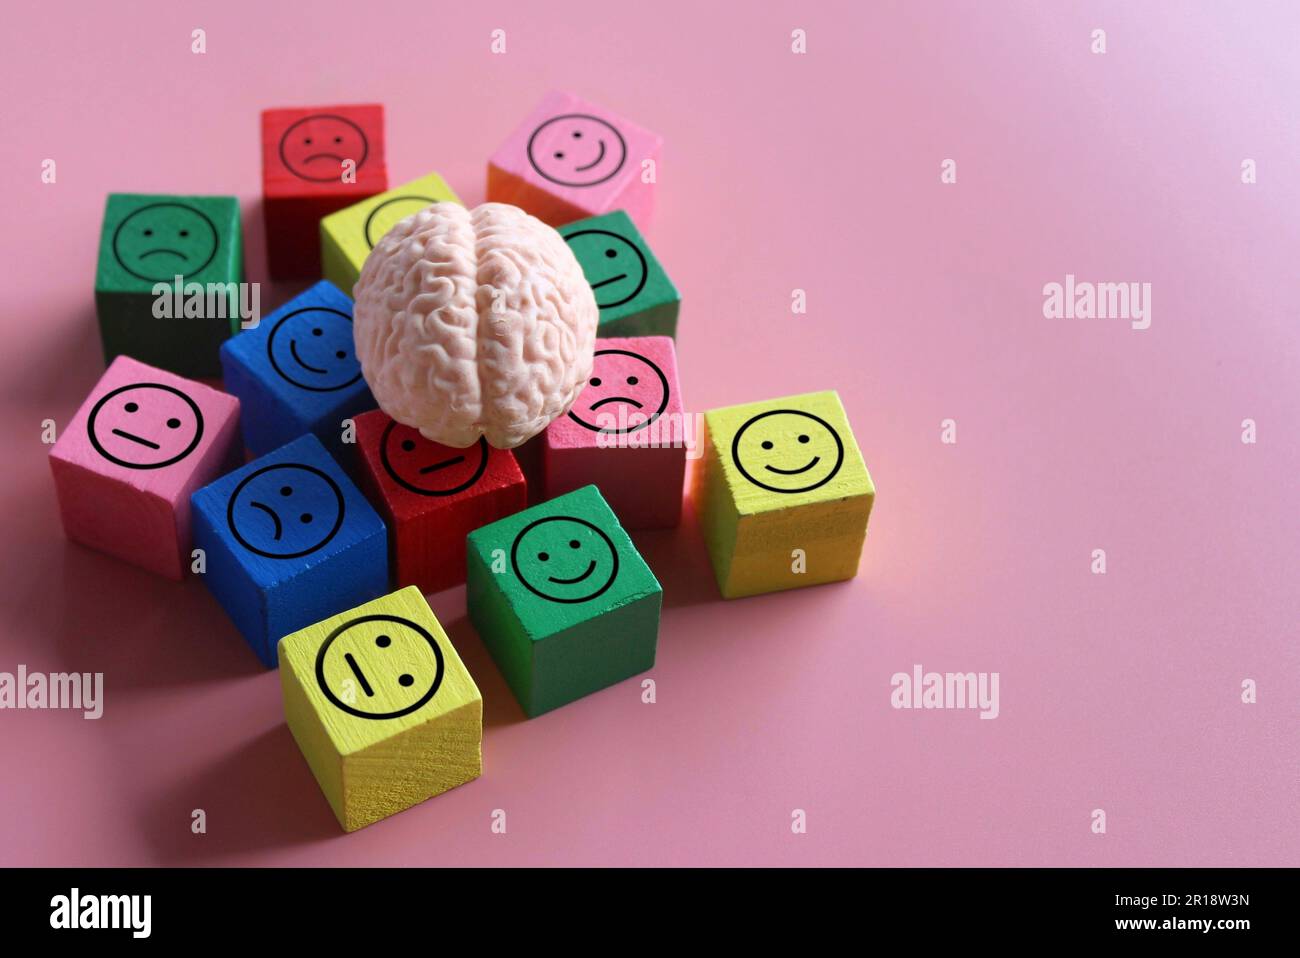 Human brain with happy, neutral and sad icon. Mental health, mood swings, bipolar disorder concept. Stock Photo